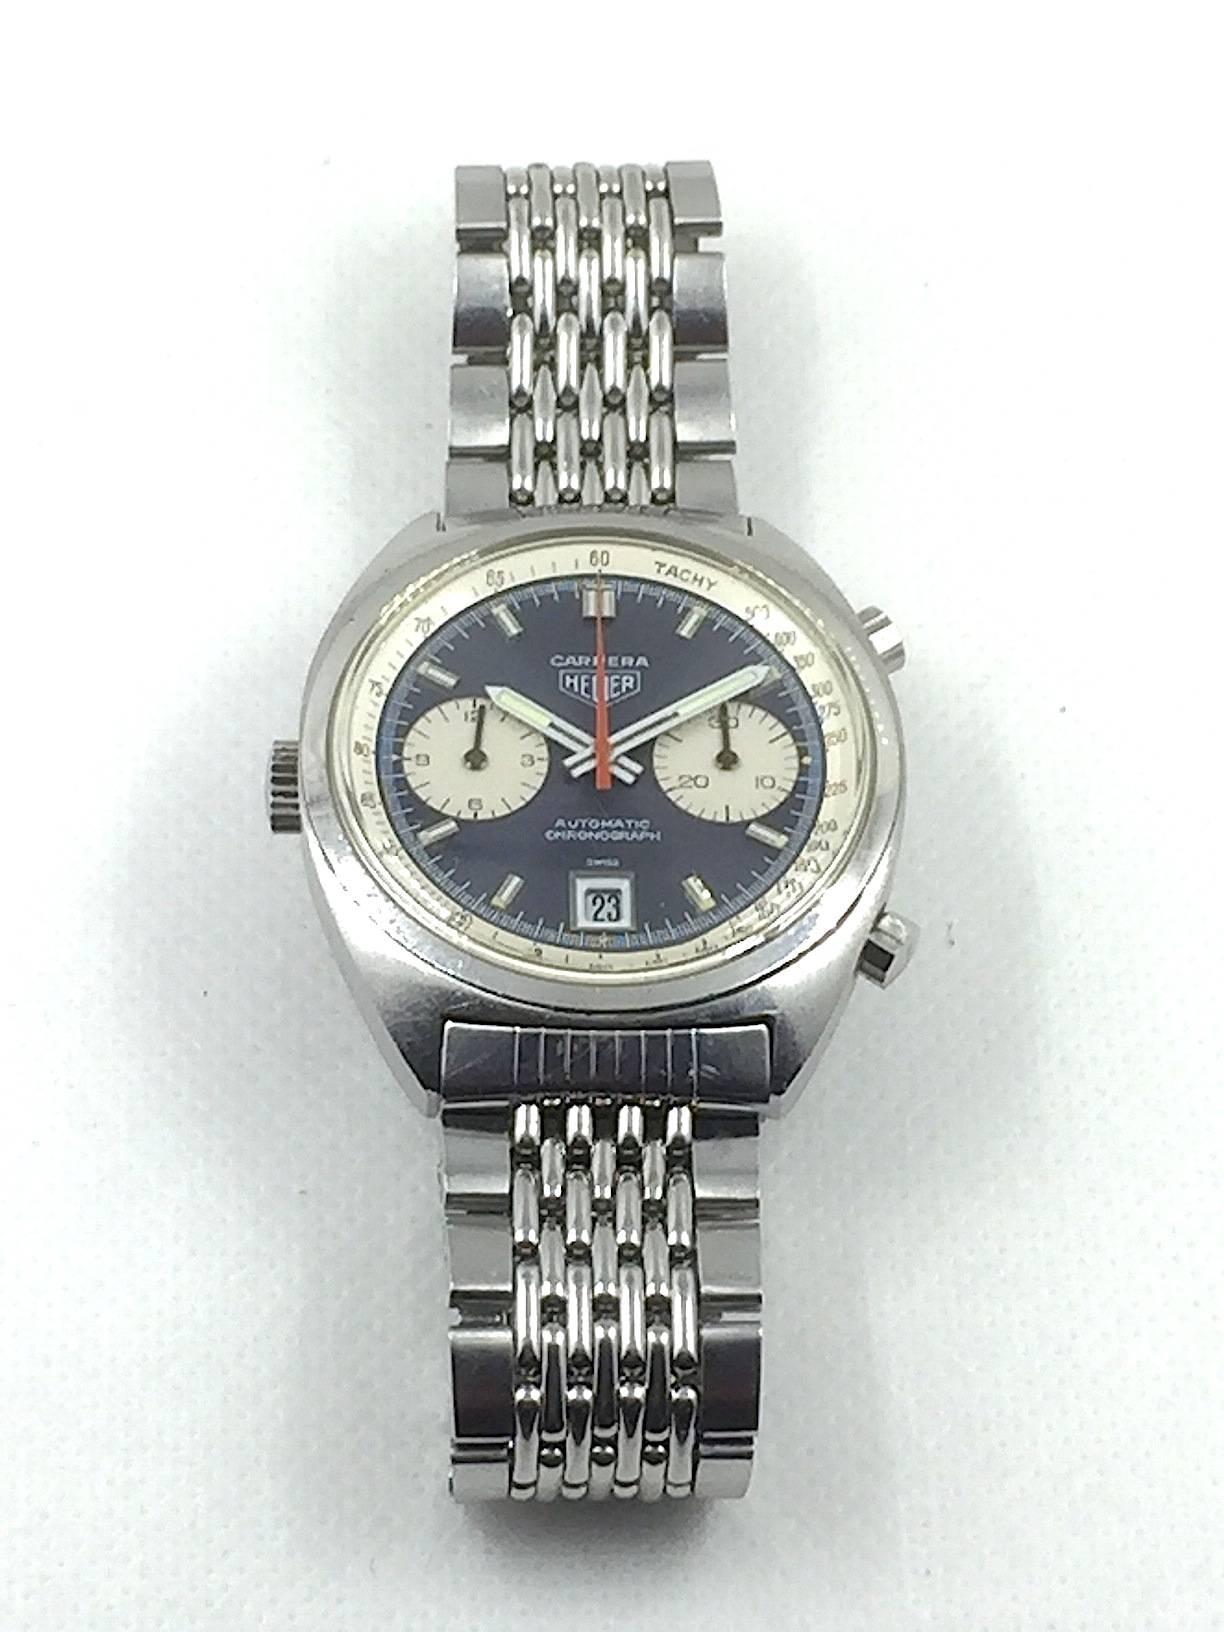 1970s Heuer Carrera Automatic Chronograph Reference 1153 Wristwatch
Year: Early 1970s
Stainless Steel Case
Reference 1153
Chronograph Function with Flyback
Heuer Signature Crown on Left Side of Case
Dimensions: 38mm diameter; 9mm Thick
Designed for